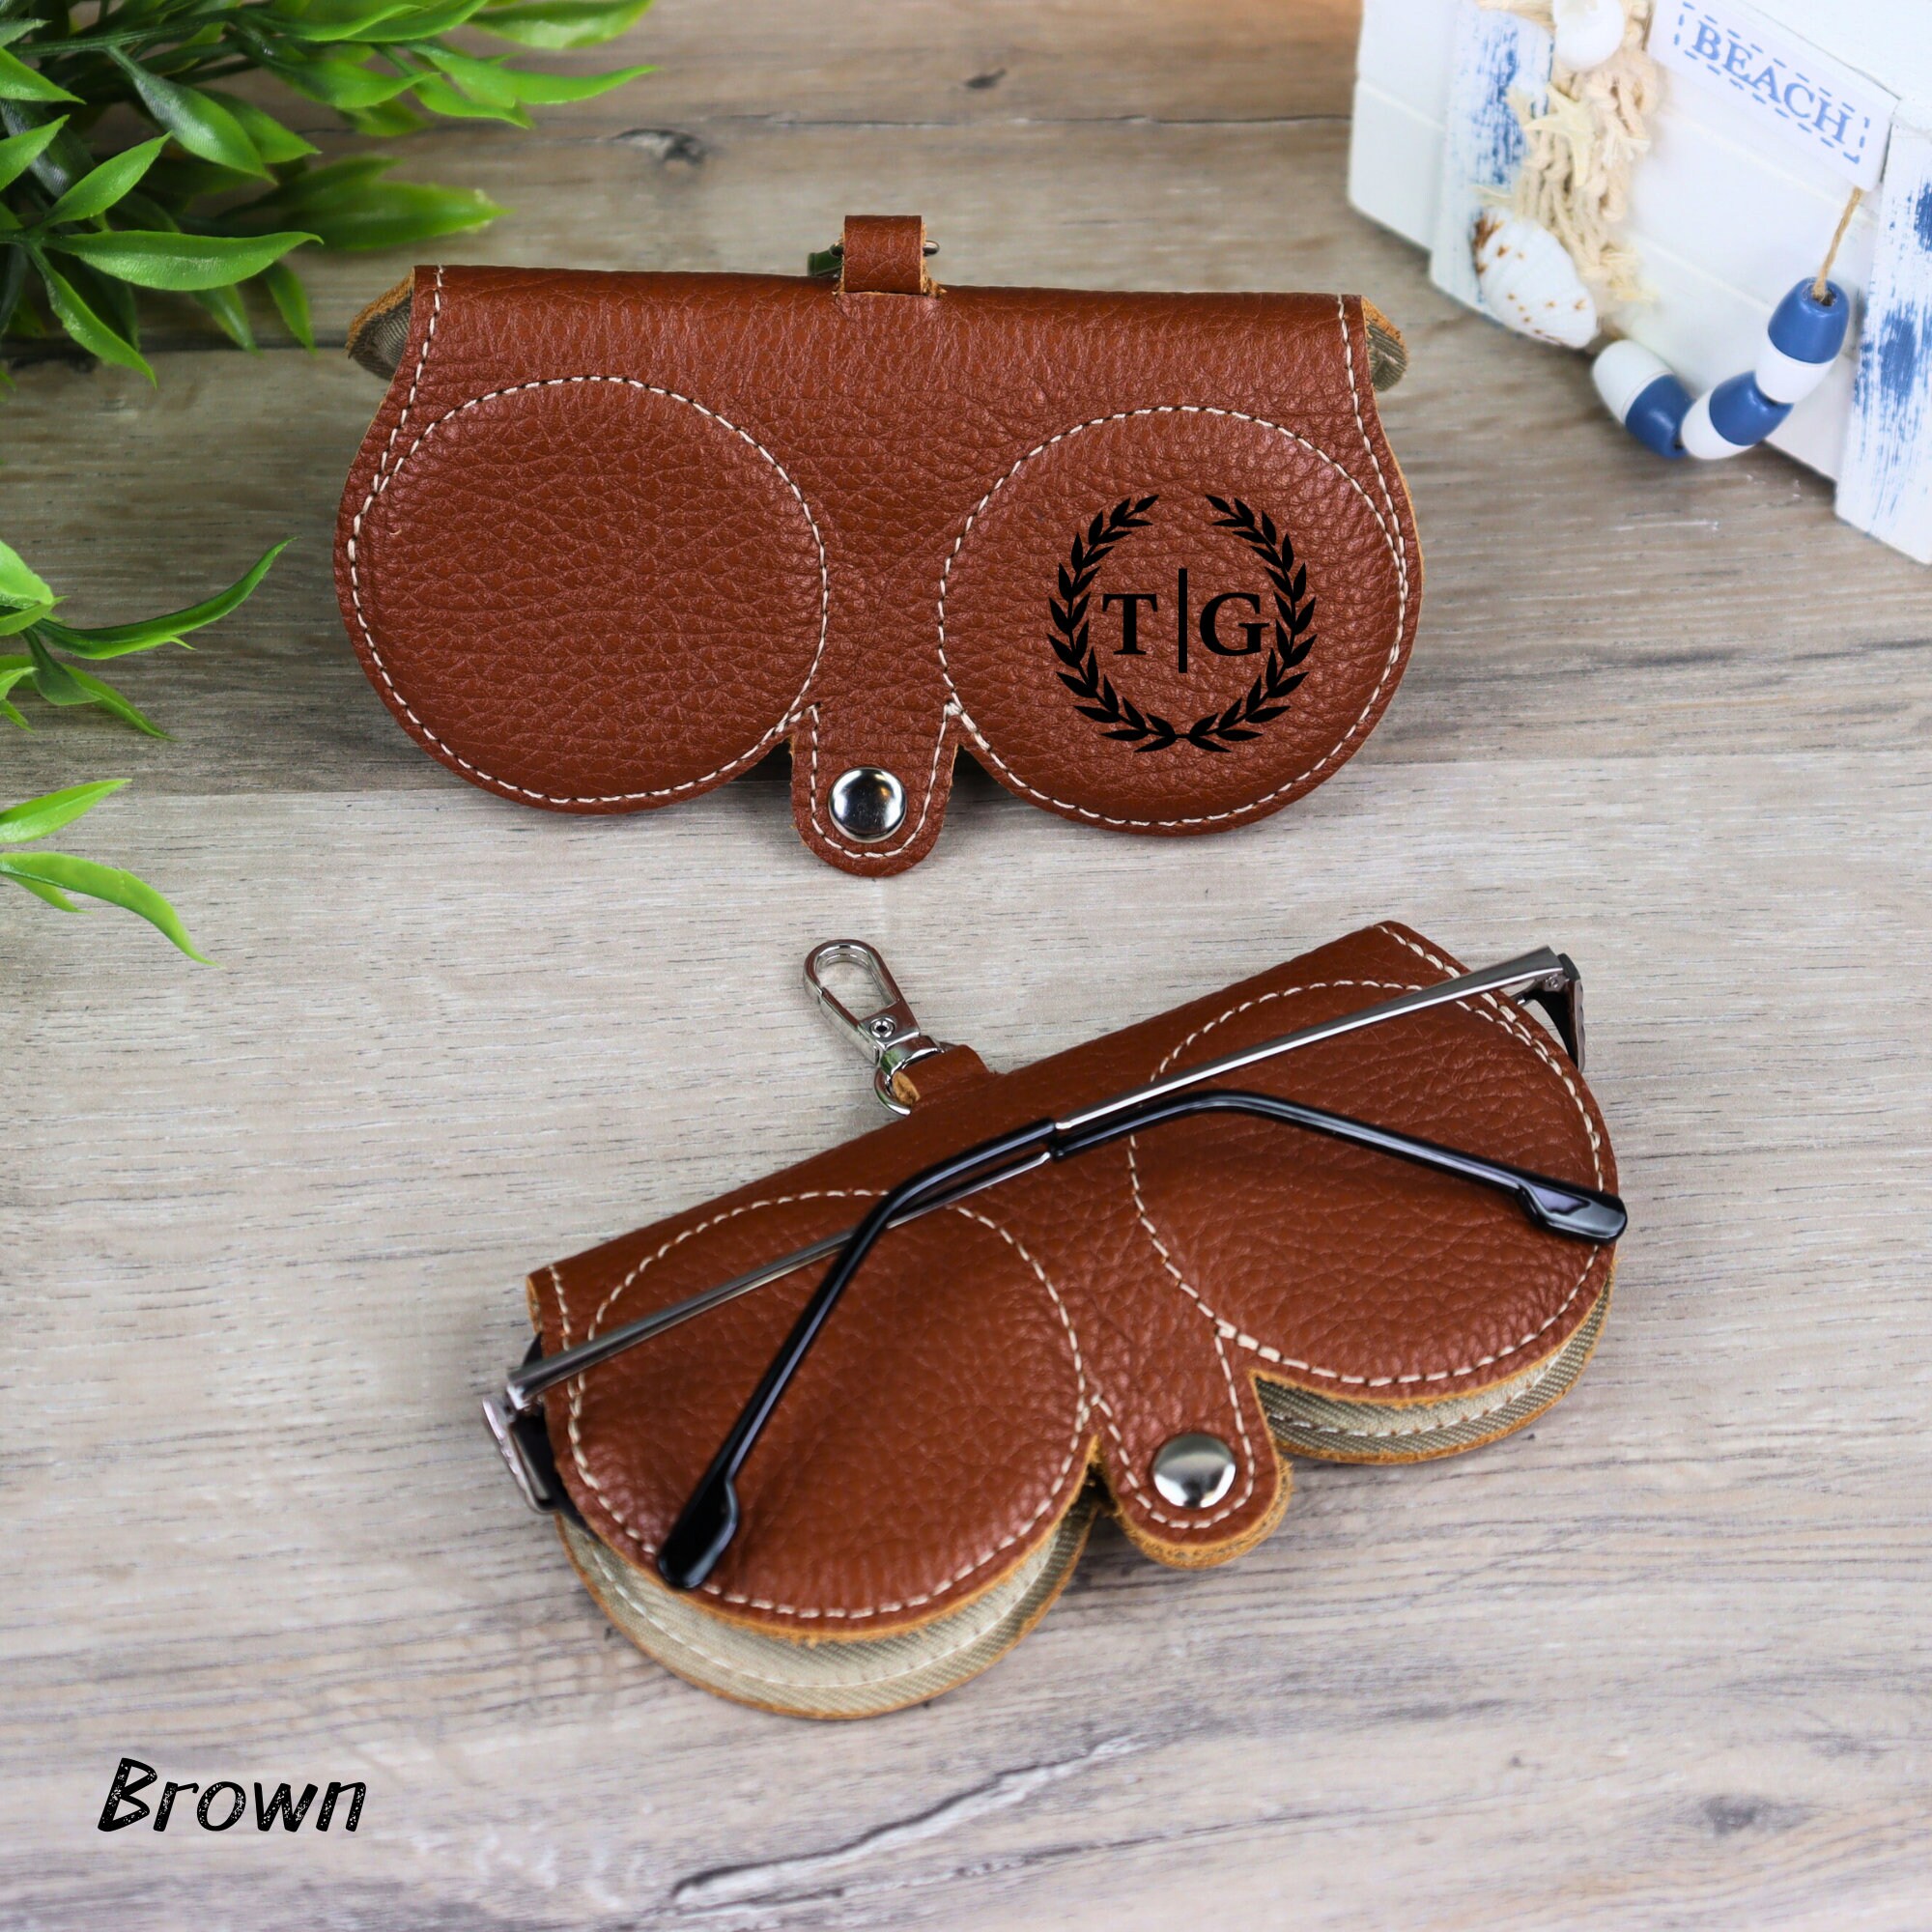 Personalized Genuine Leather Glasses Case with Silver Hook, Portable Sunglasses Sleeves, Durable Soft Eyeglasses Pouch Slim Spectacle Holder